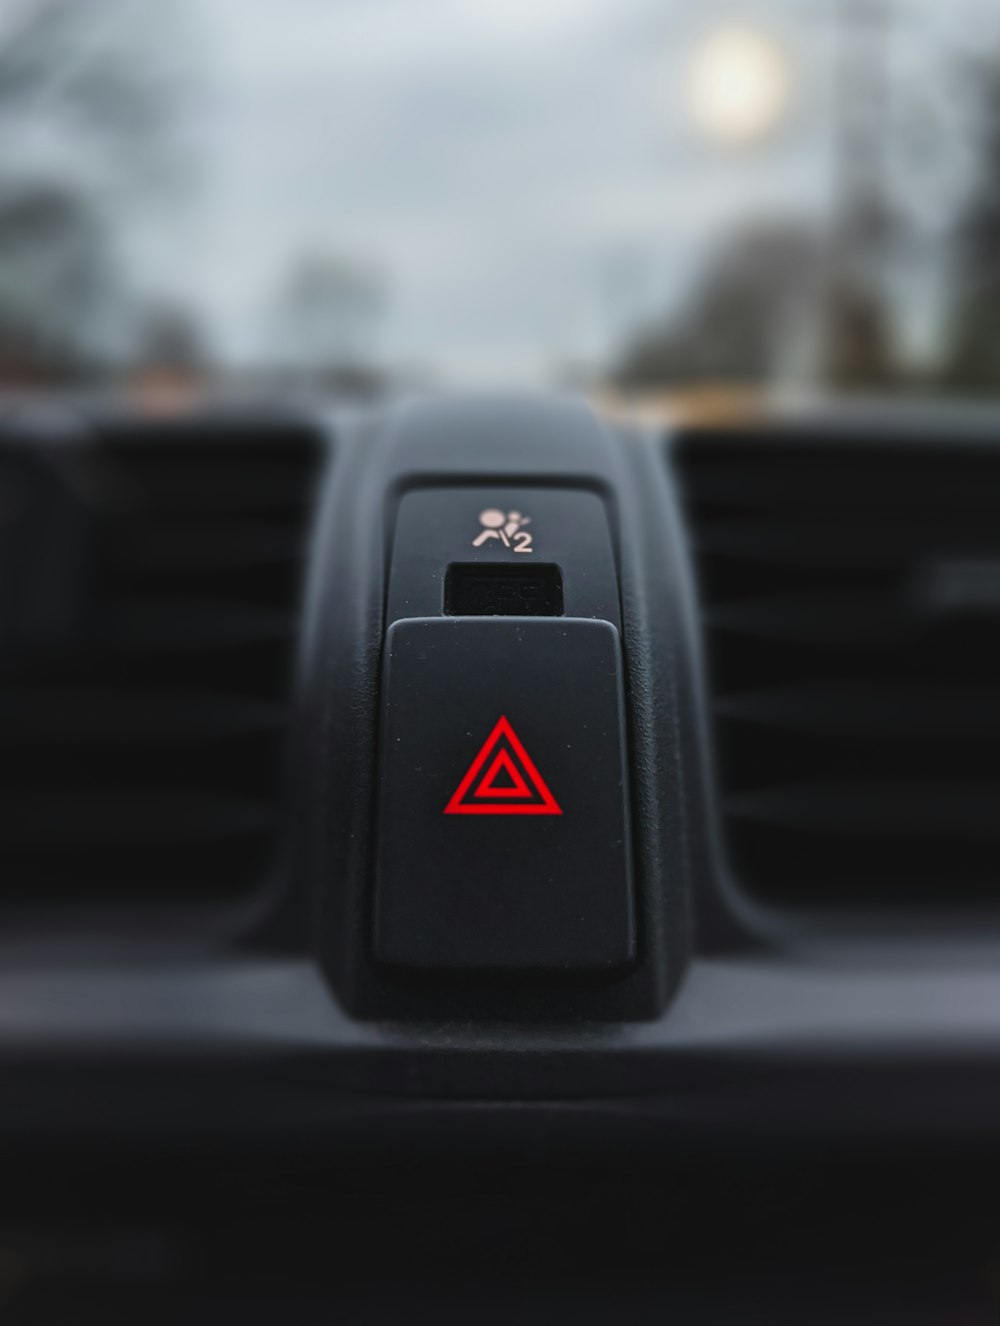 a close up of a car's air vent with a red triangle on it